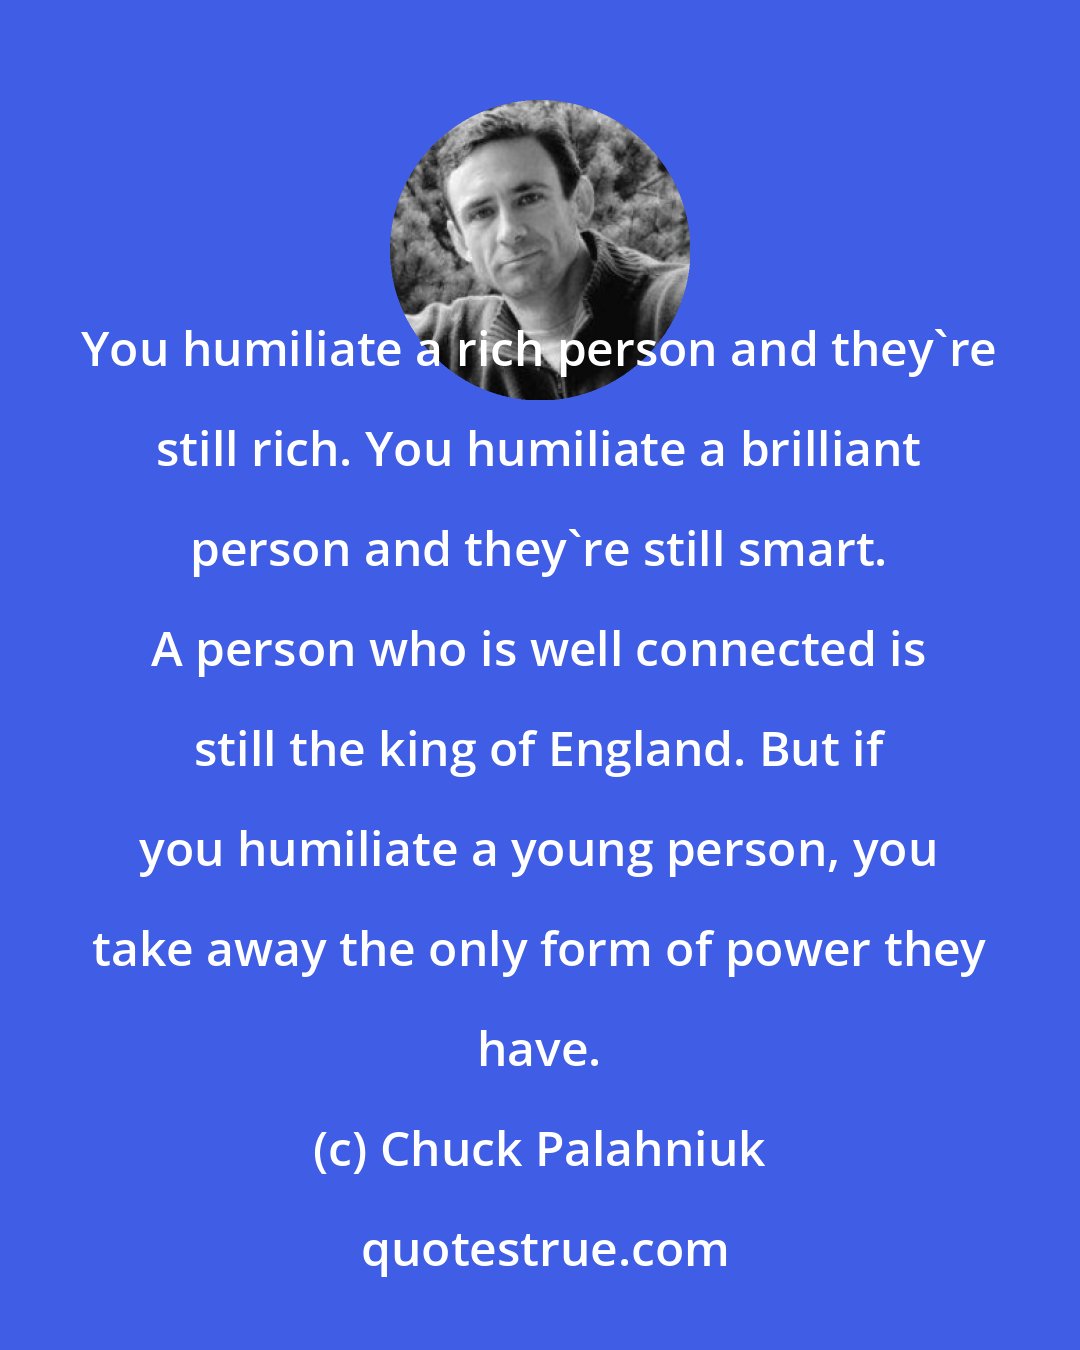 Chuck Palahniuk: You humiliate a rich person and they're still rich. You humiliate a brilliant person and they're still smart. A person who is well connected is still the king of England. But if you humiliate a young person, you take away the only form of power they have.